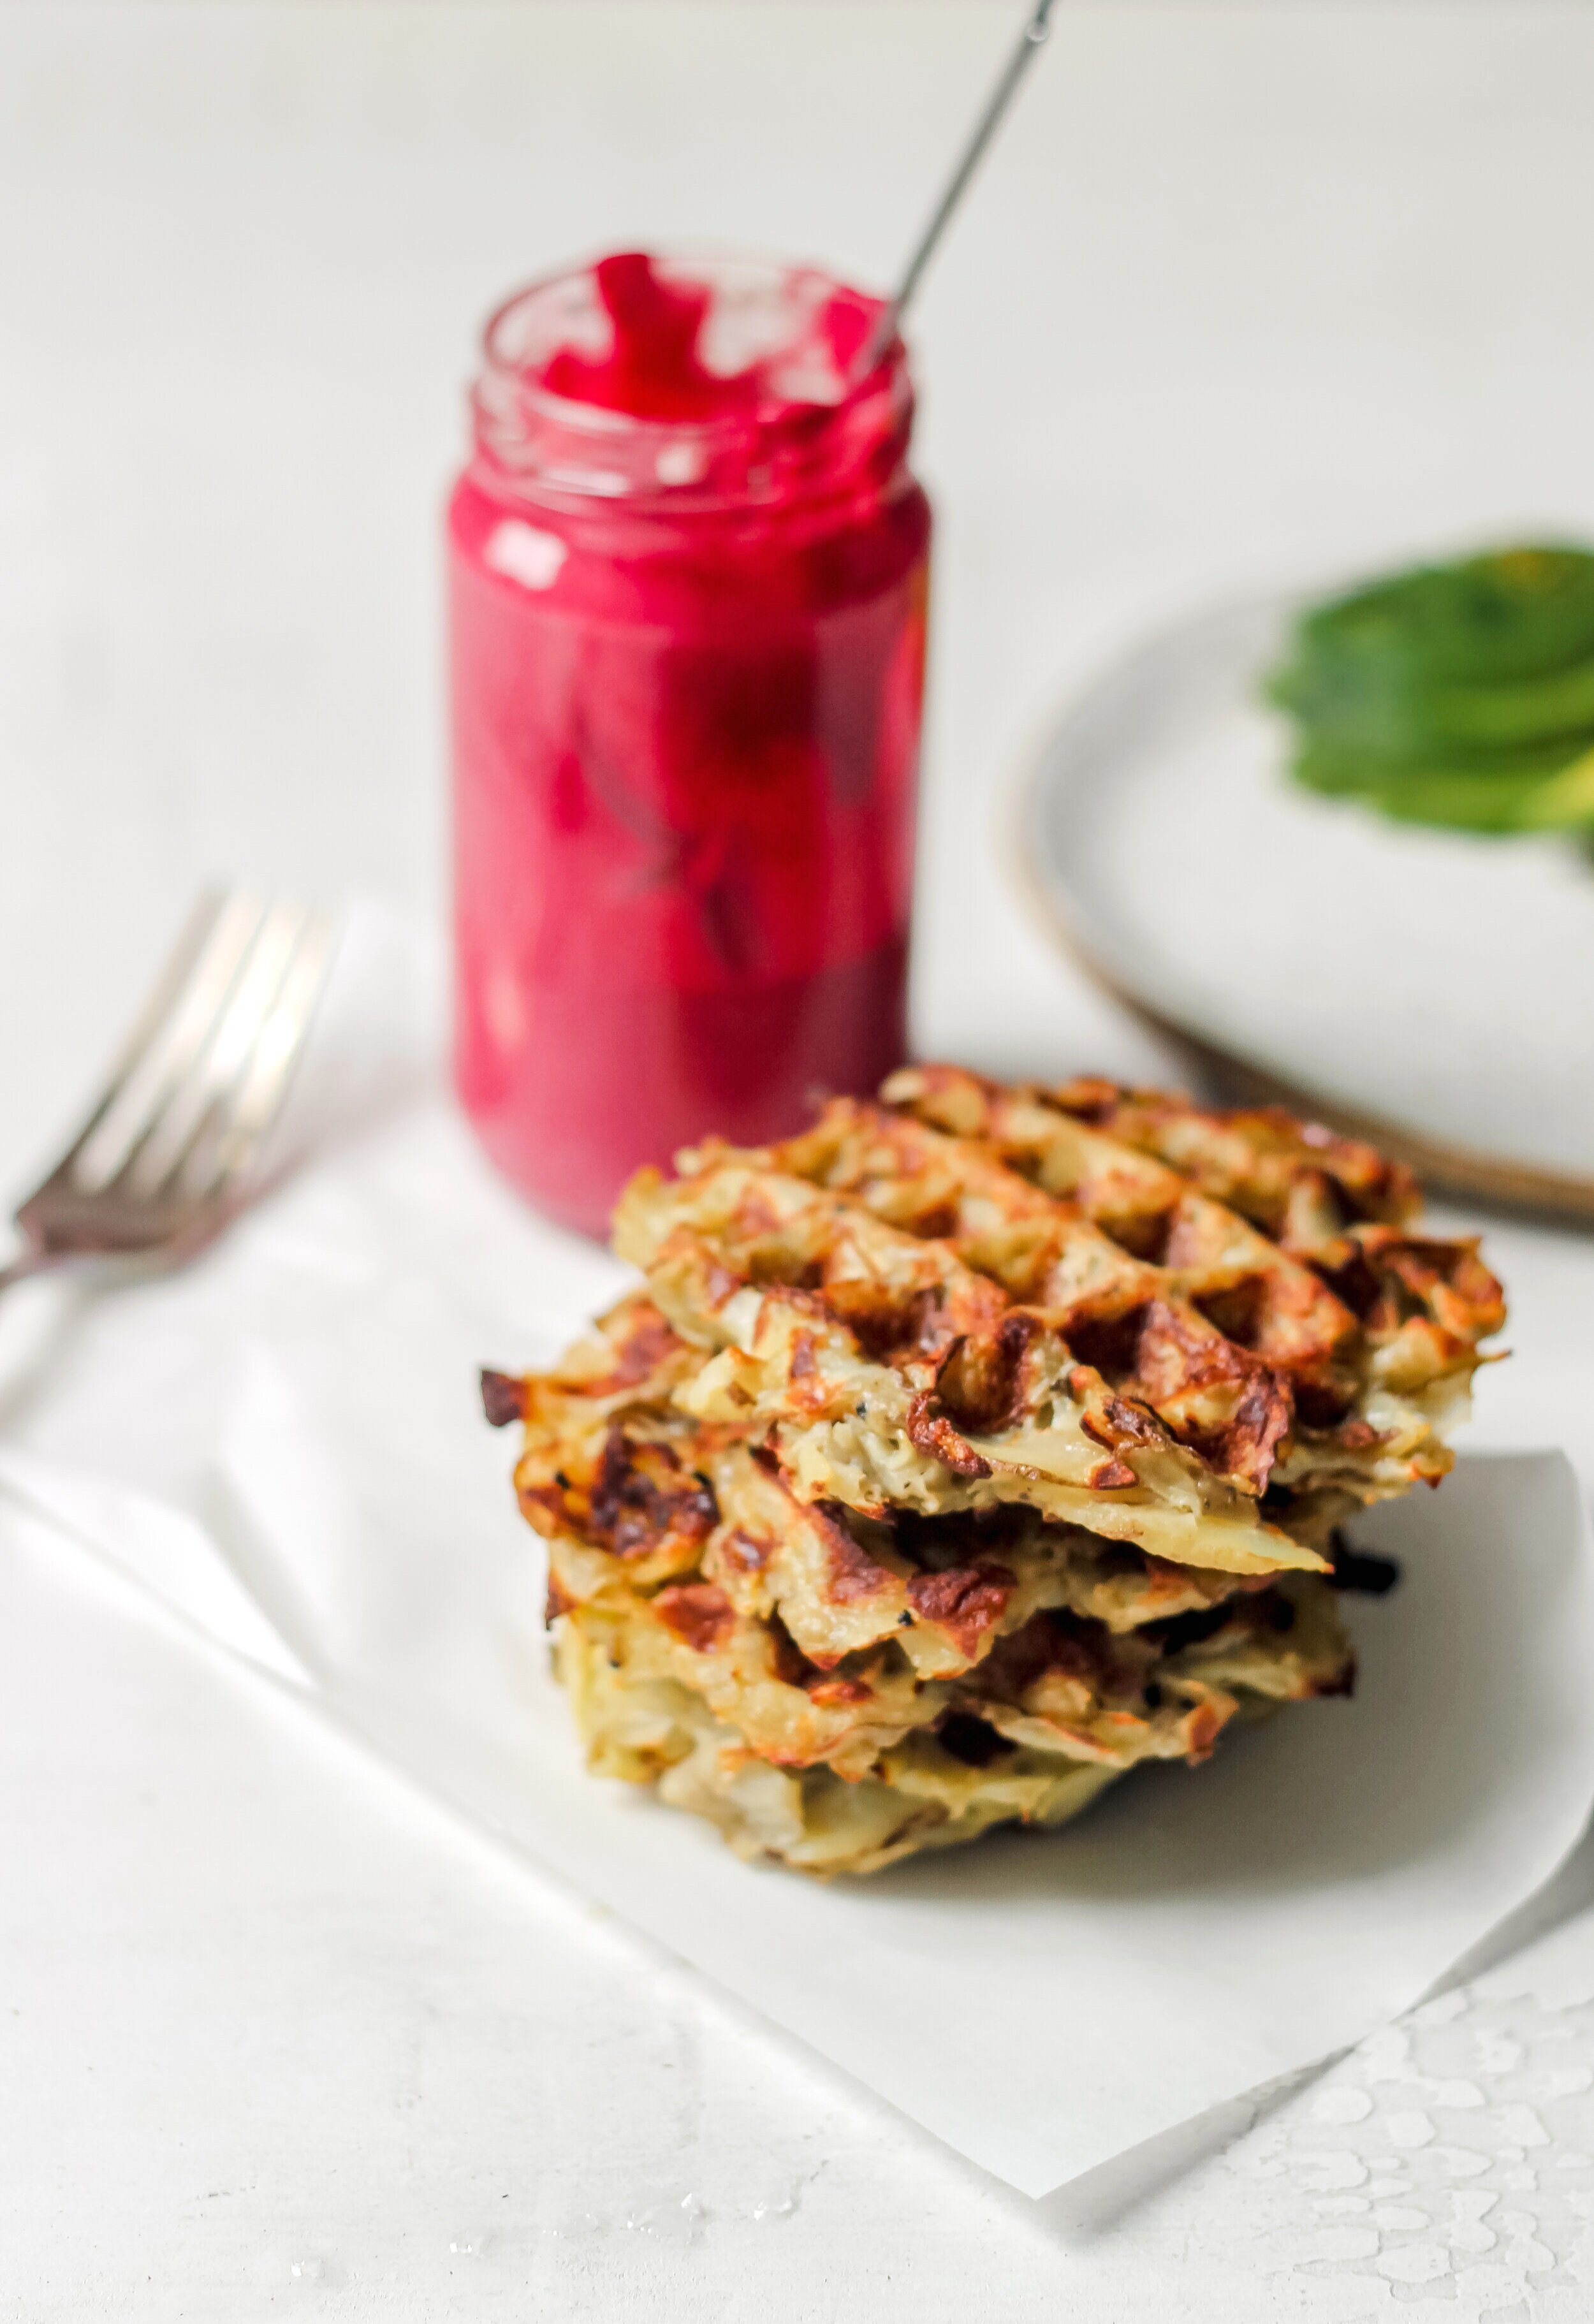 Waffle-Iron Hash Browns - Healthier Dishes